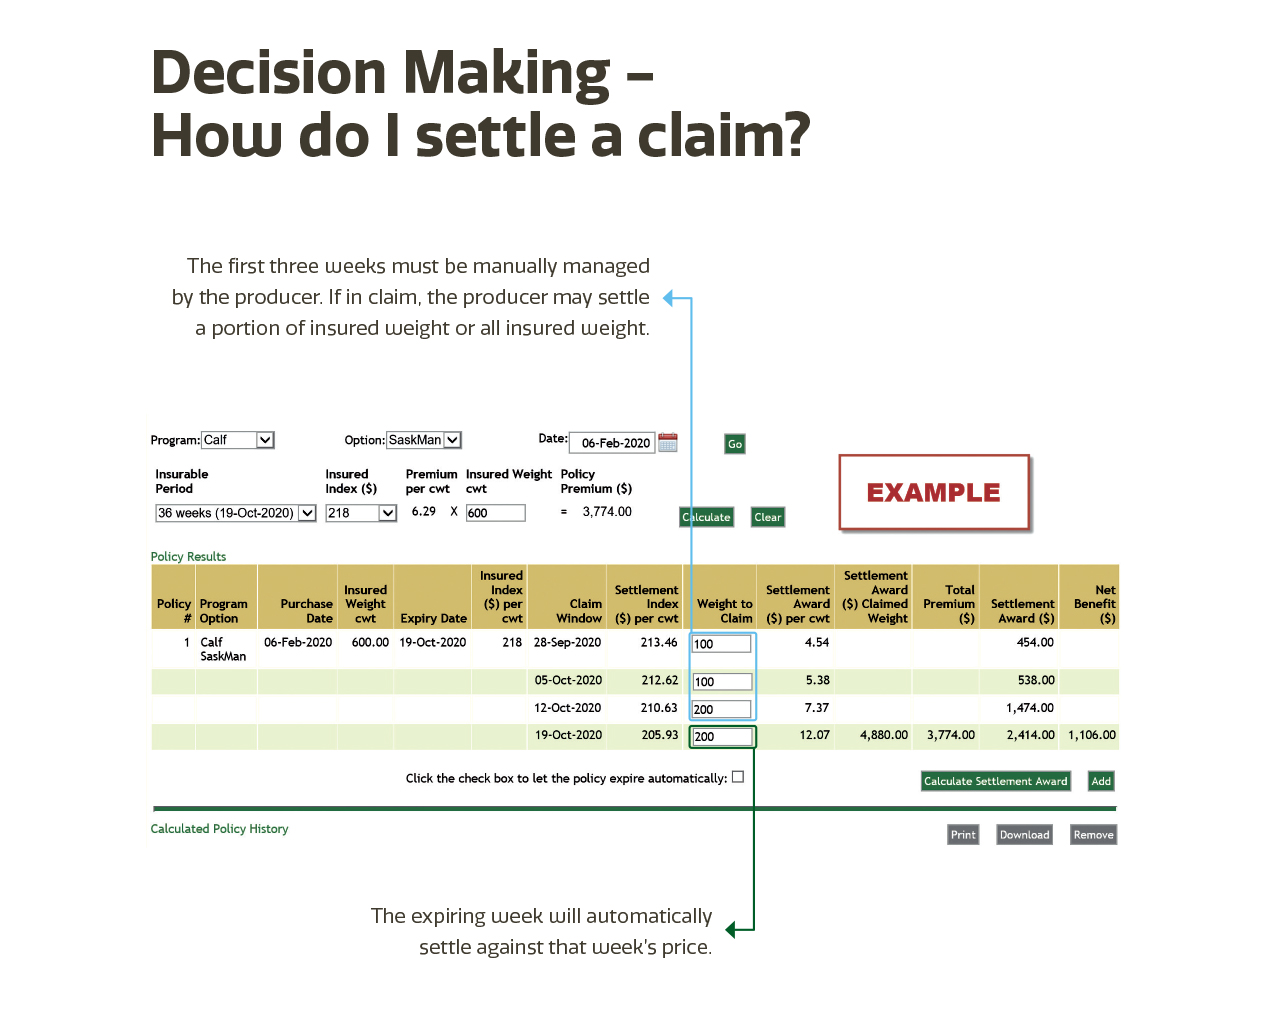 Decisions Making: How do I settle a claim table